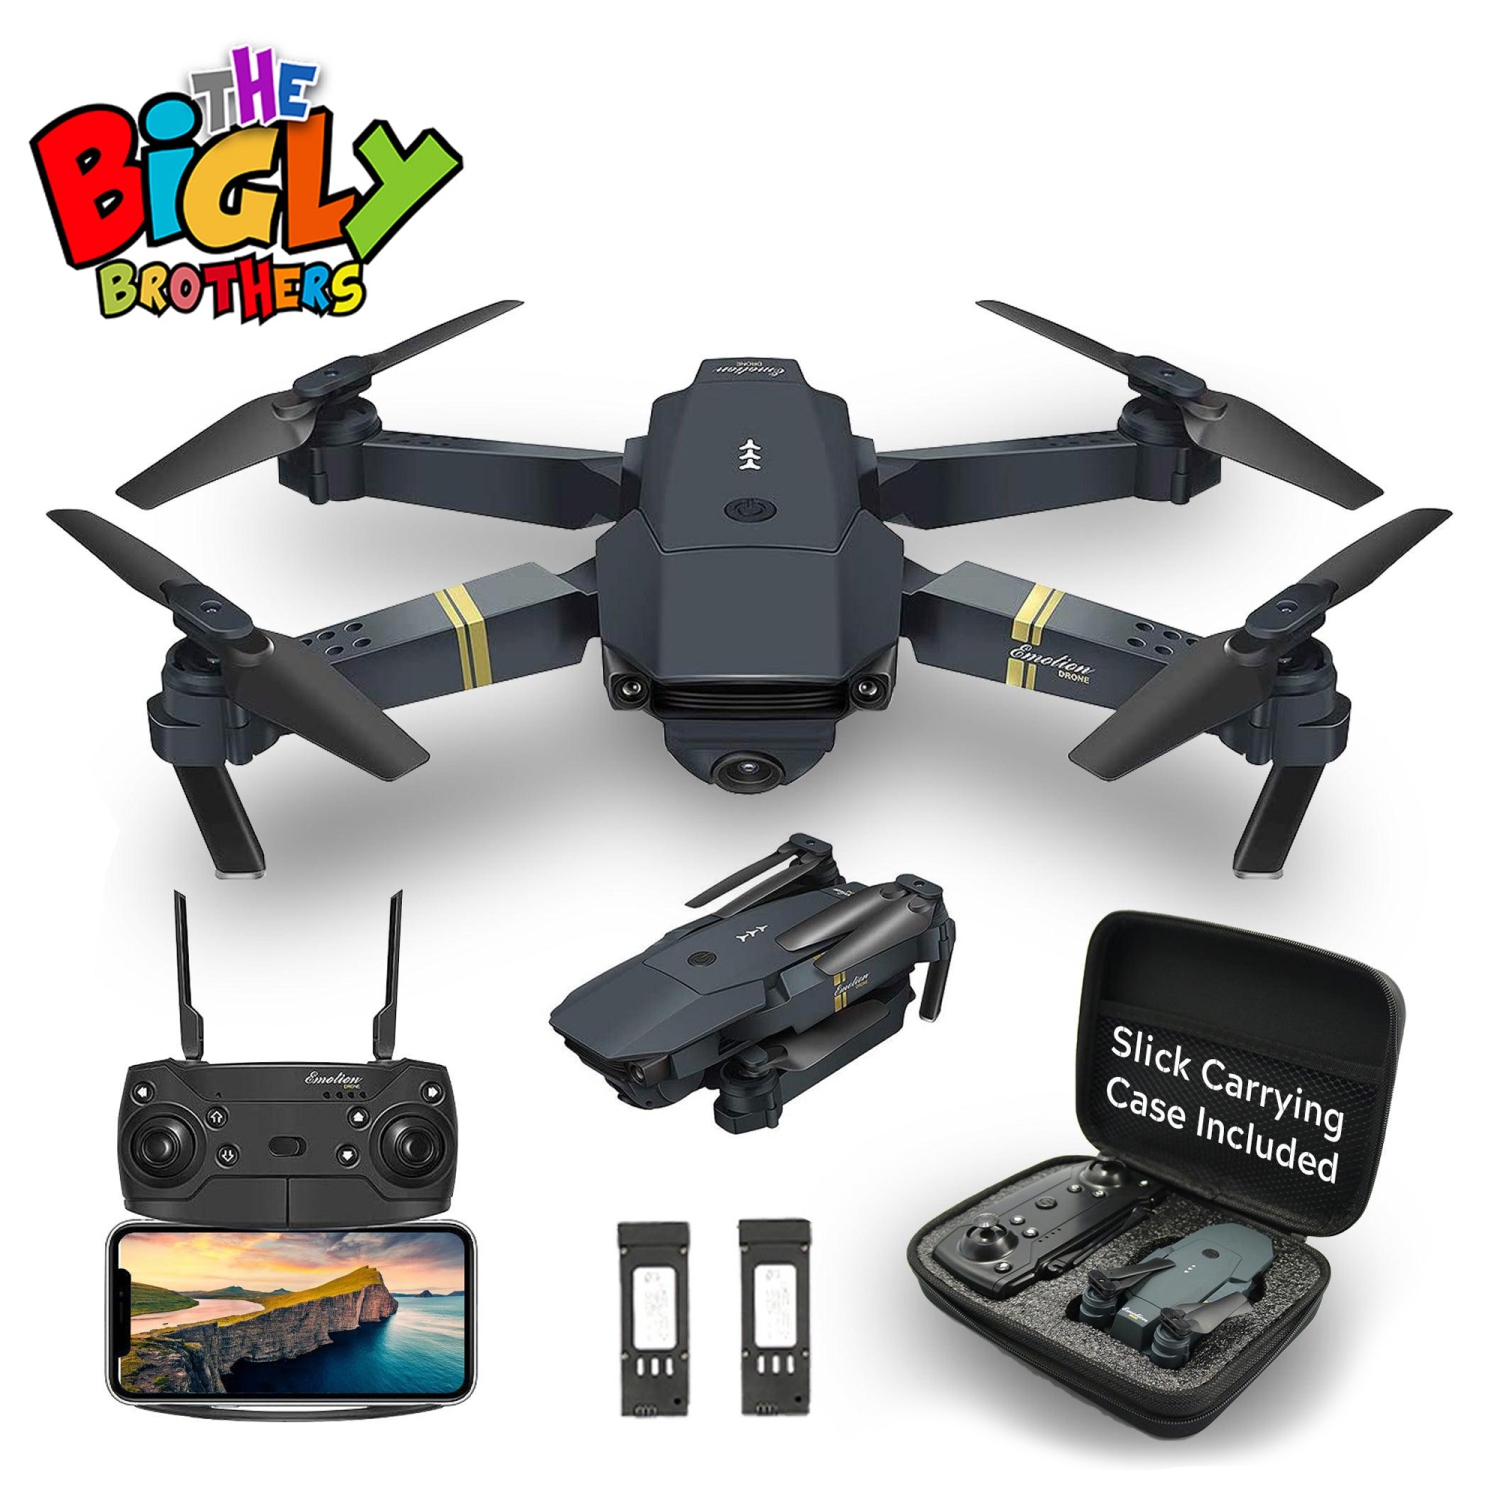 Open Box - The Bigly Brothers E58 Pro Edition Drone with Camera, 1080p Black Drone, Carrying Case and 2 Batteries Included, Ready to Fly, No Assembly Required